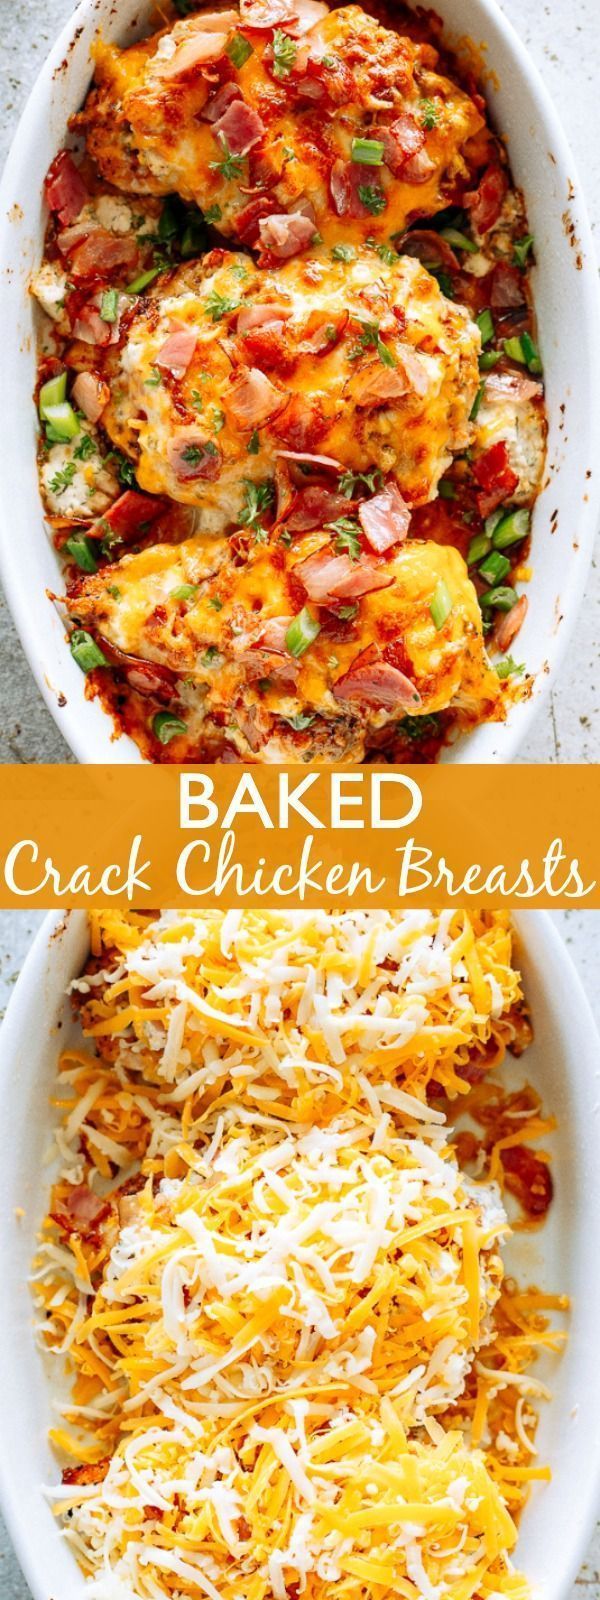 Baked Crack Chicken Breasts | Diethood -   25 dinner recipes for family main dishes chicken breasts ideas